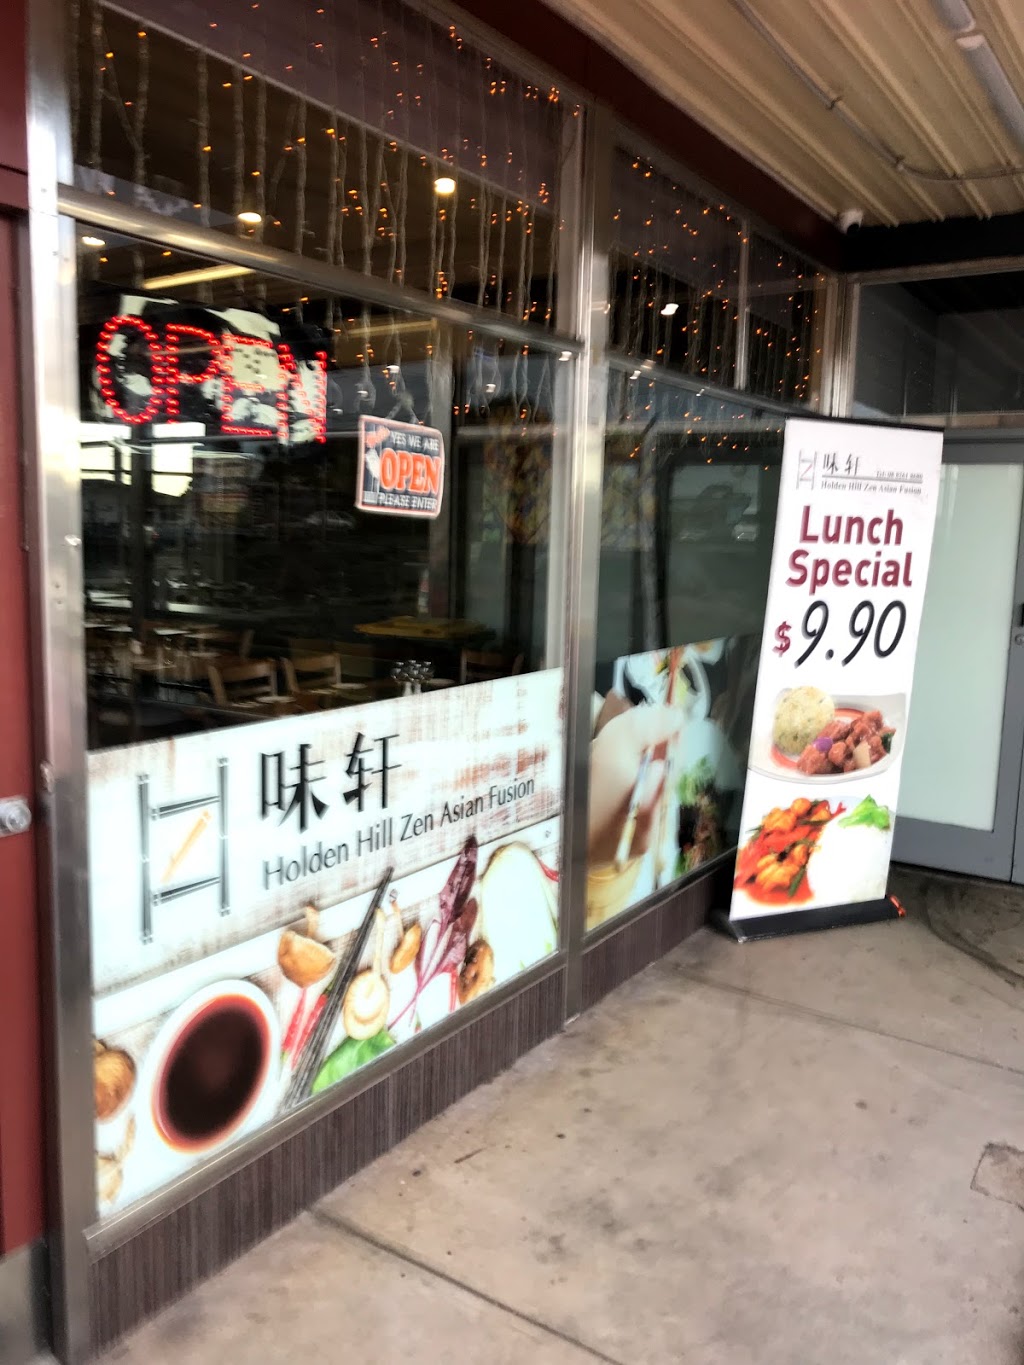 Holden Hill Zen Asia Fusion | meal delivery | 652 North East Road, Holden Hill SA 5088, Australia | 0882618680 OR +61 8 8261 8680